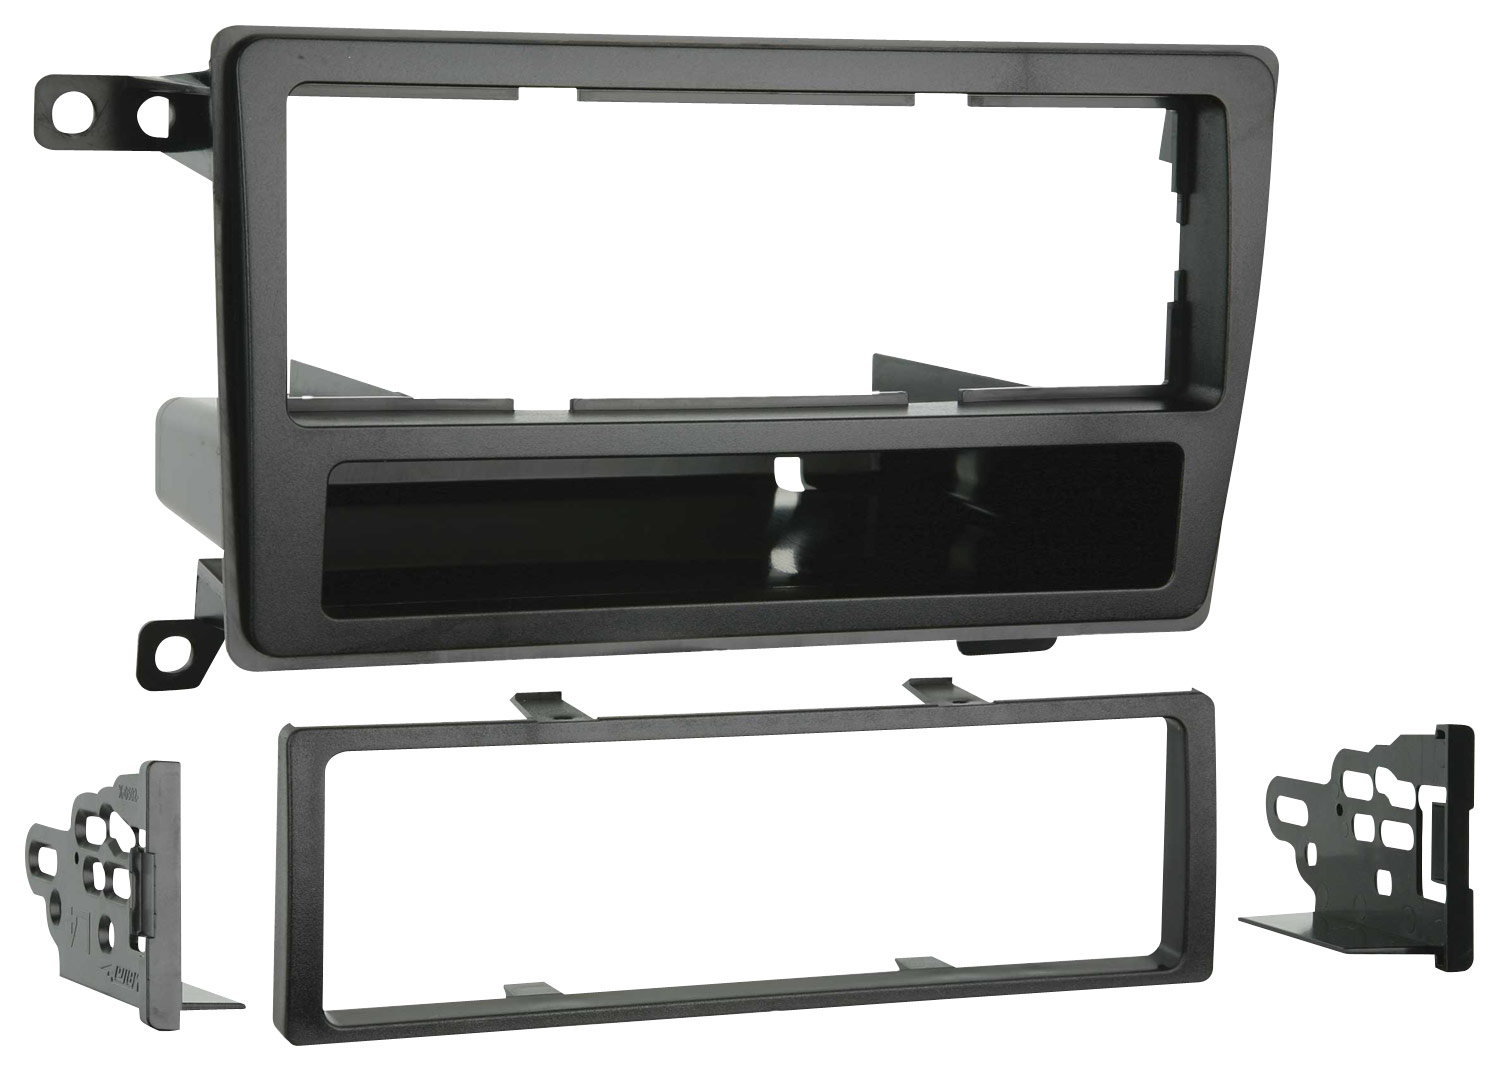 Metra - Dash Kit for Select 2001-2003 Infiniti QX4/Nissan Pathfinder LE - Black was $16.99 now $12.74 (25.0% off)